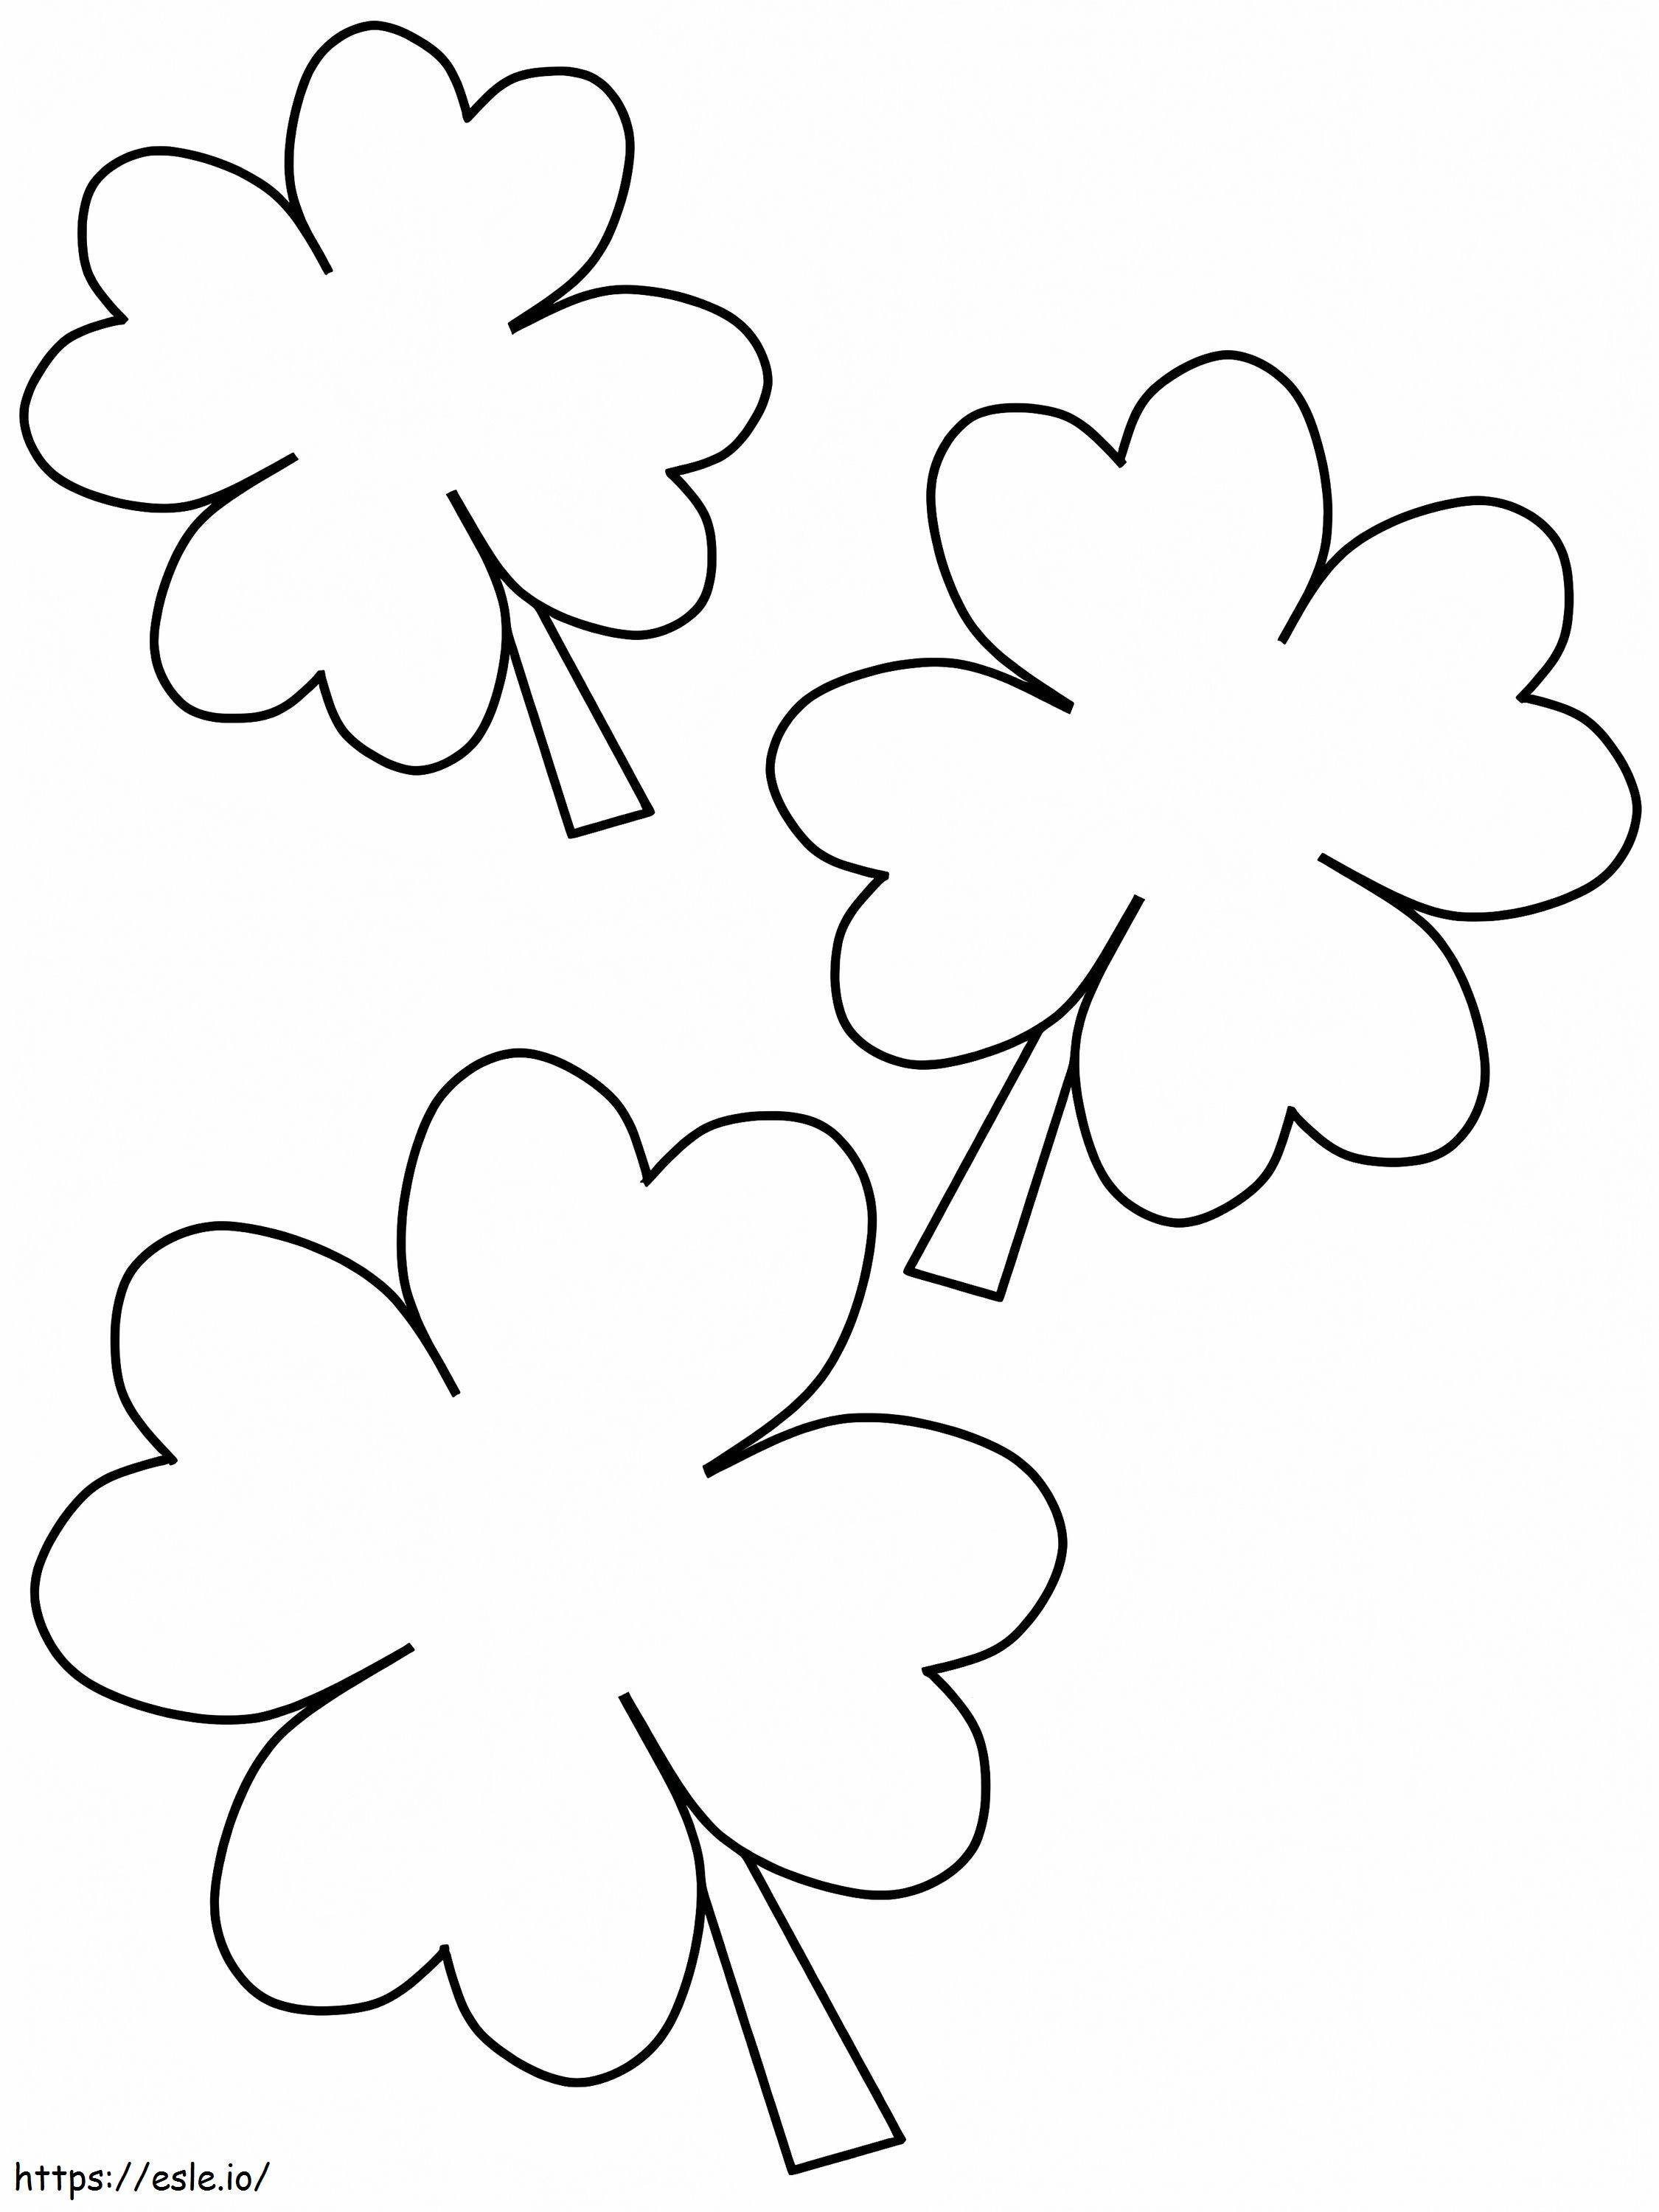 Four Leaf Clover 8 coloring page